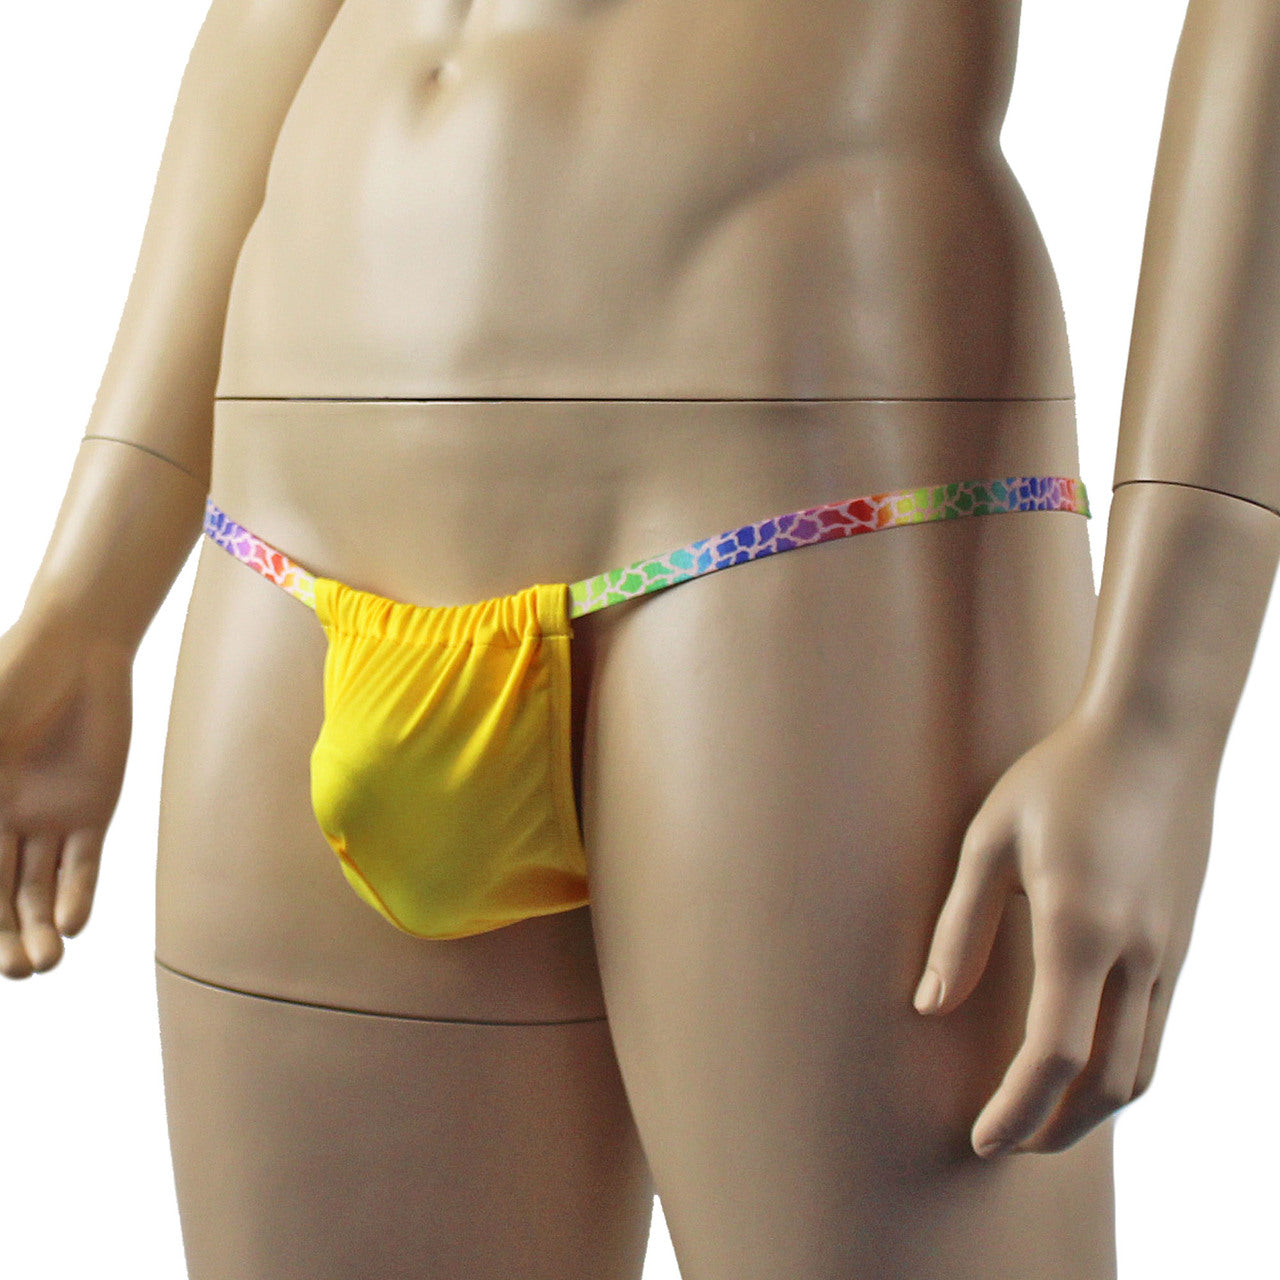 Mens Wild Colourful Adjustable Ball Bag Pouch G string Underwear Yellow